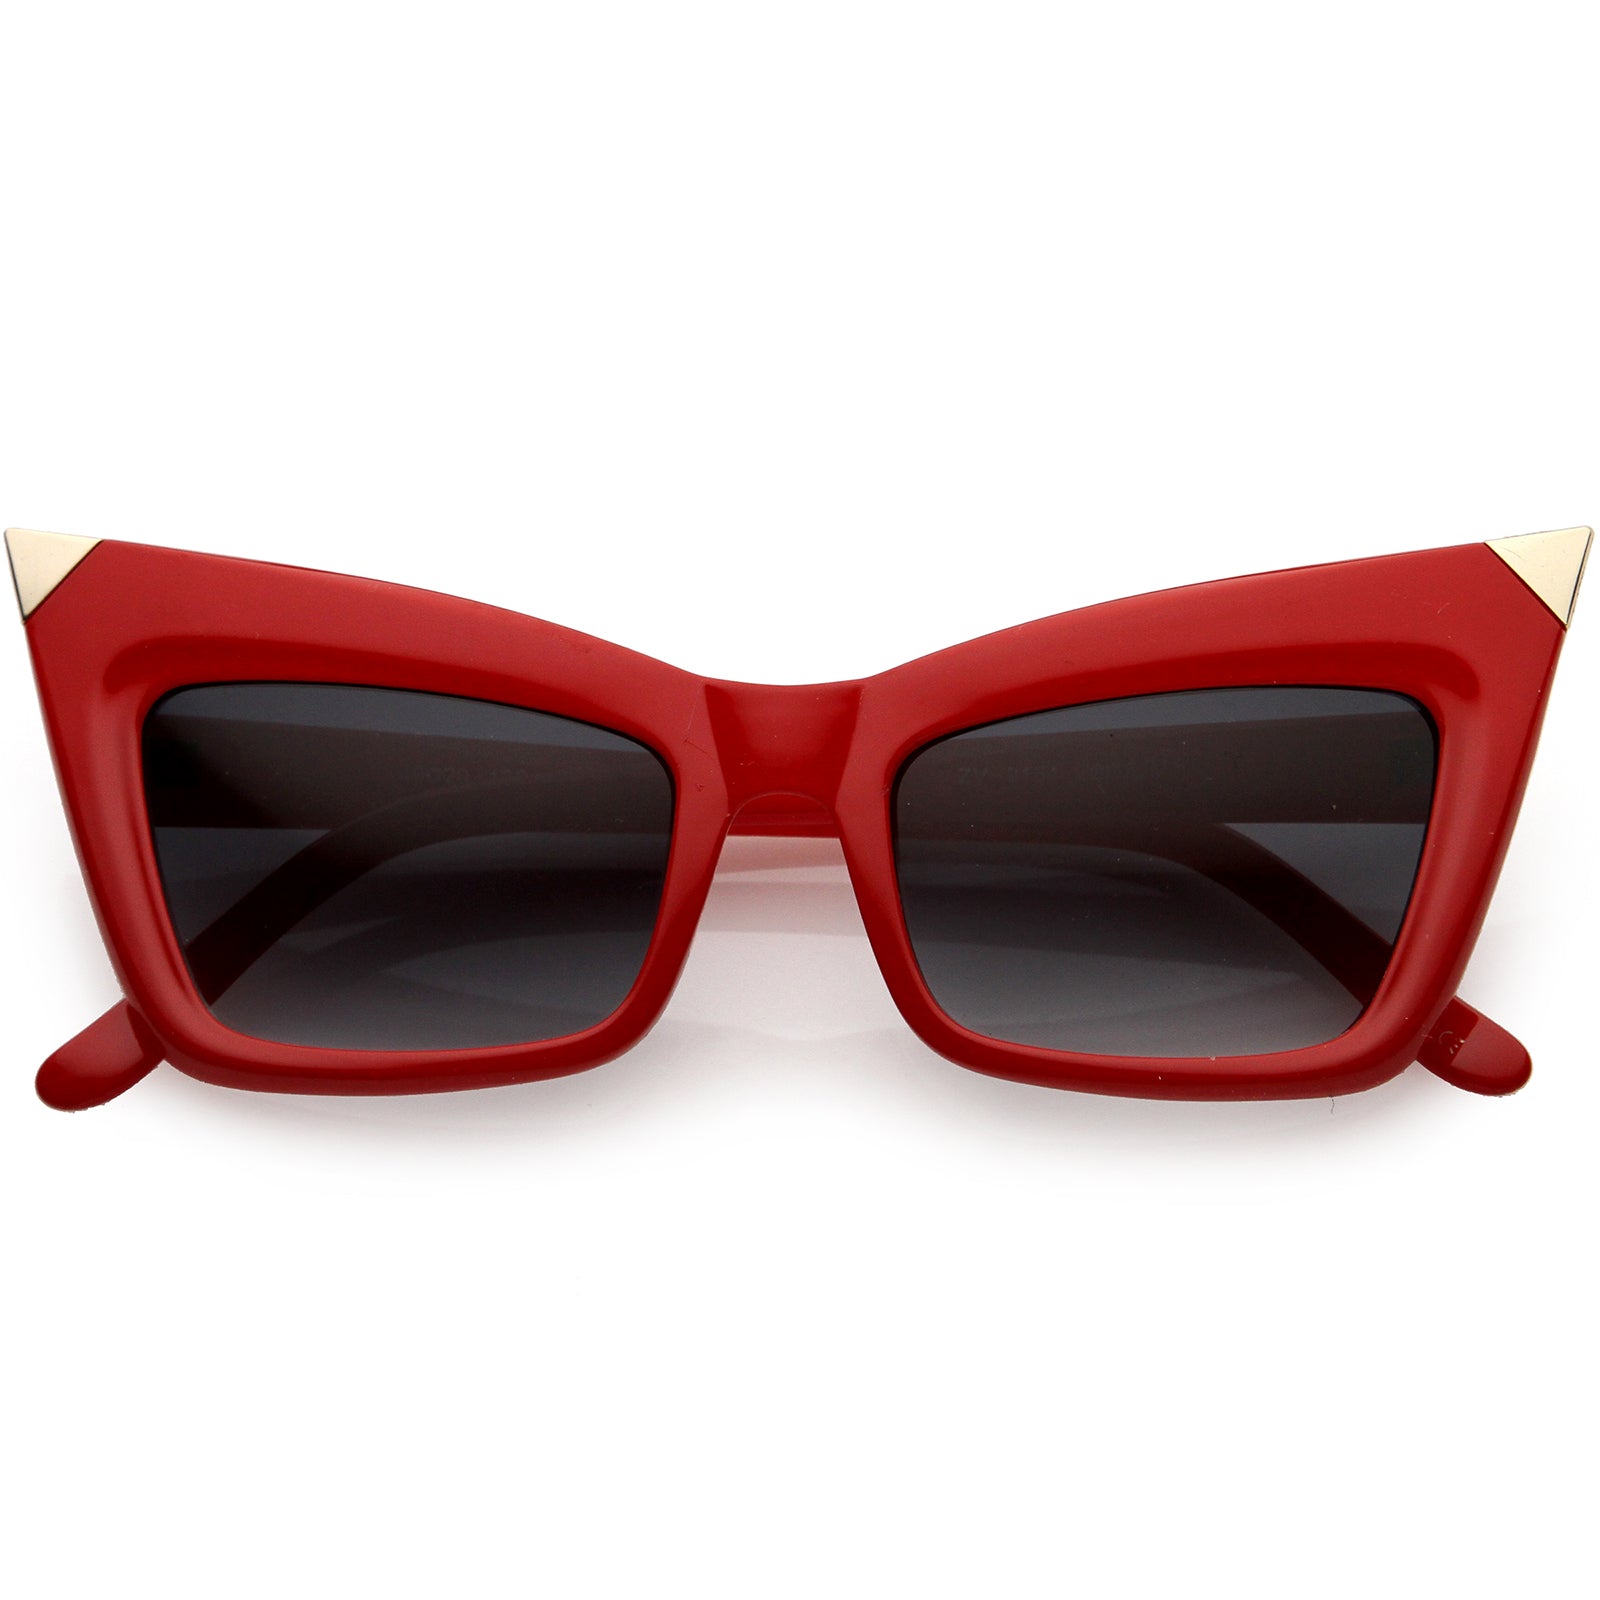 Empyre Frankie Red Square Cat Eye Sunglasses